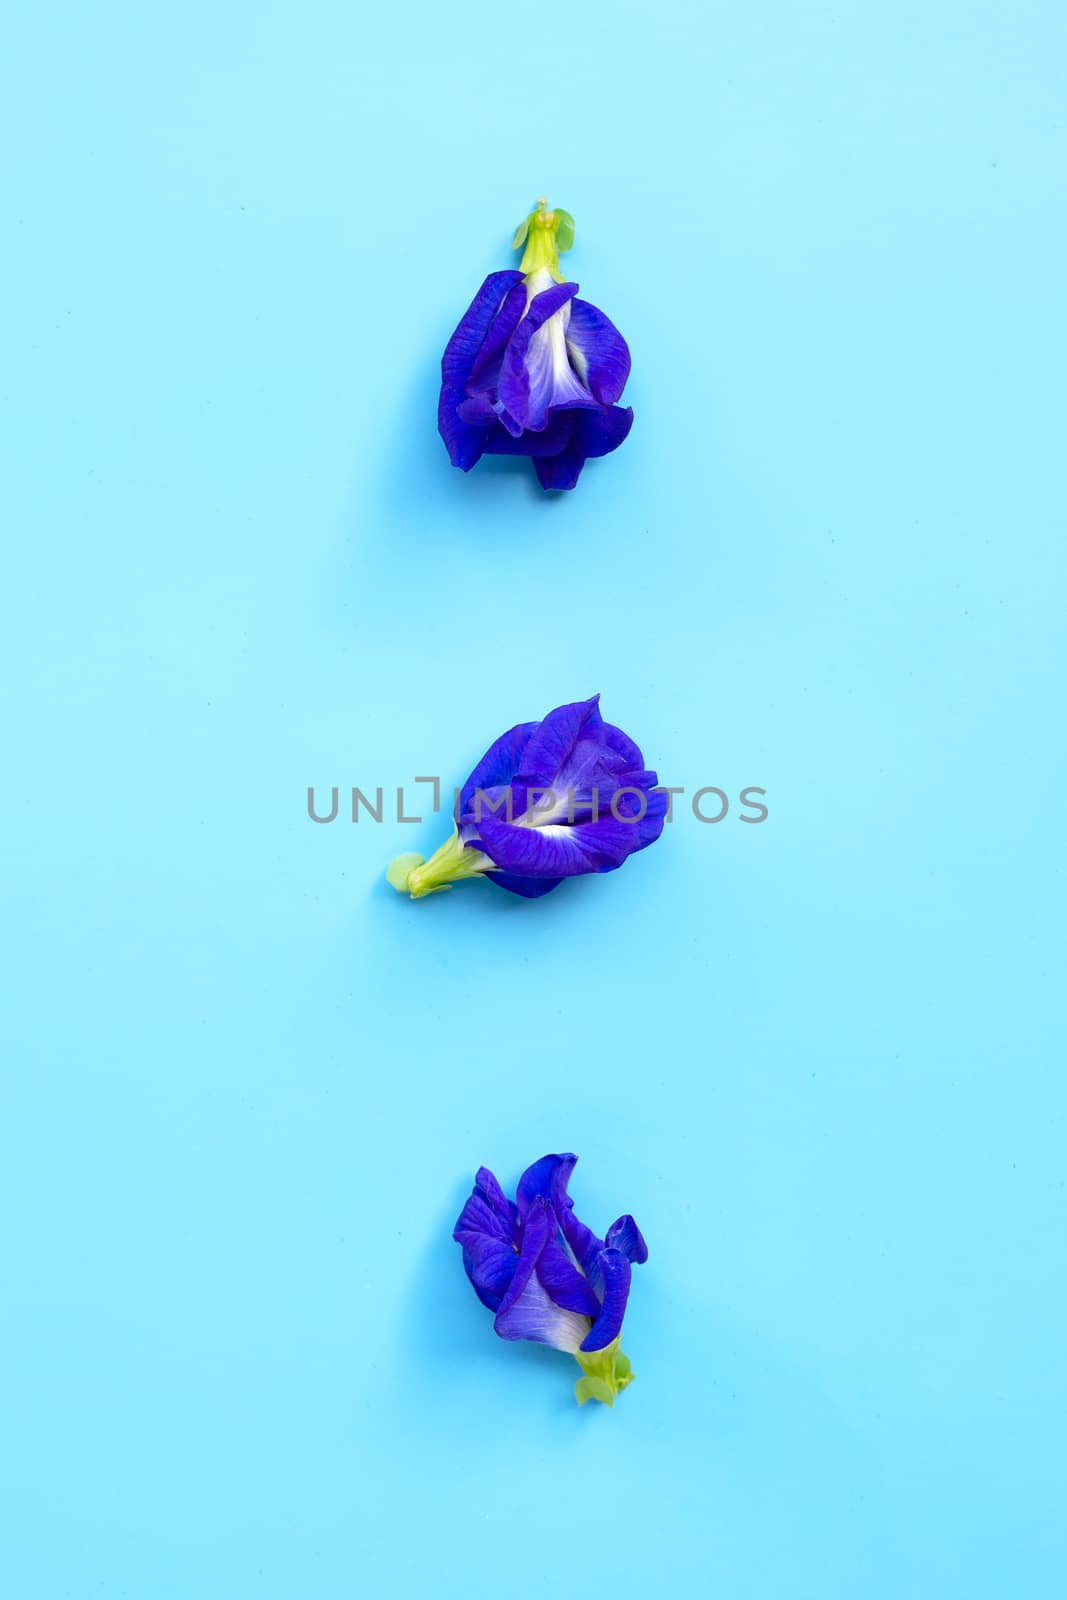 Blue butterfly pea flower blooming, blue background. by Bowonpat